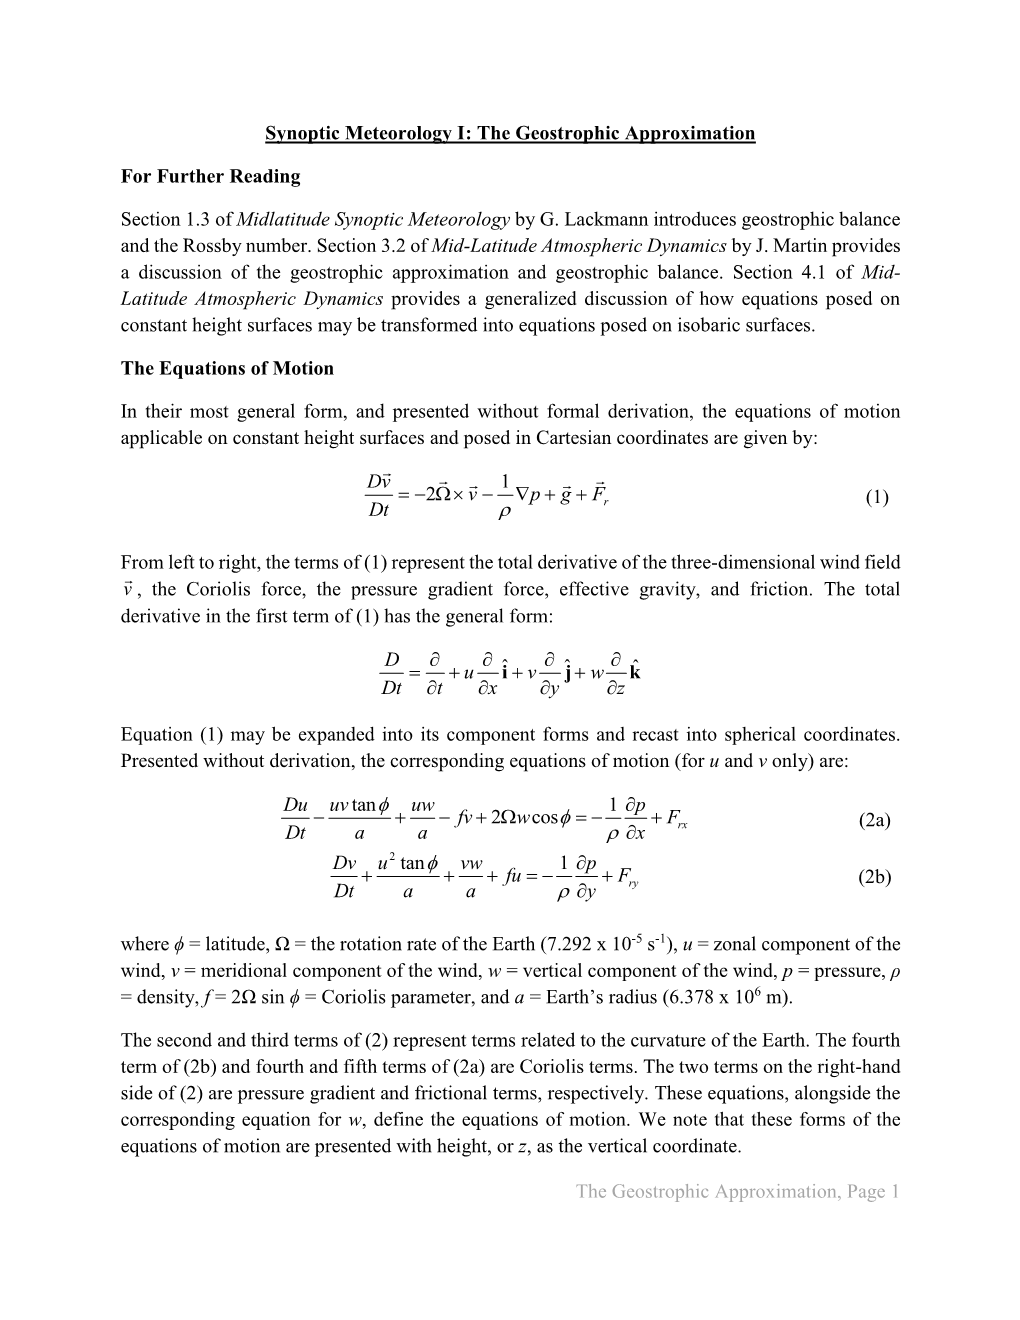 The Geostrophic Approximation, Page 1 Synoptic Meteorology I